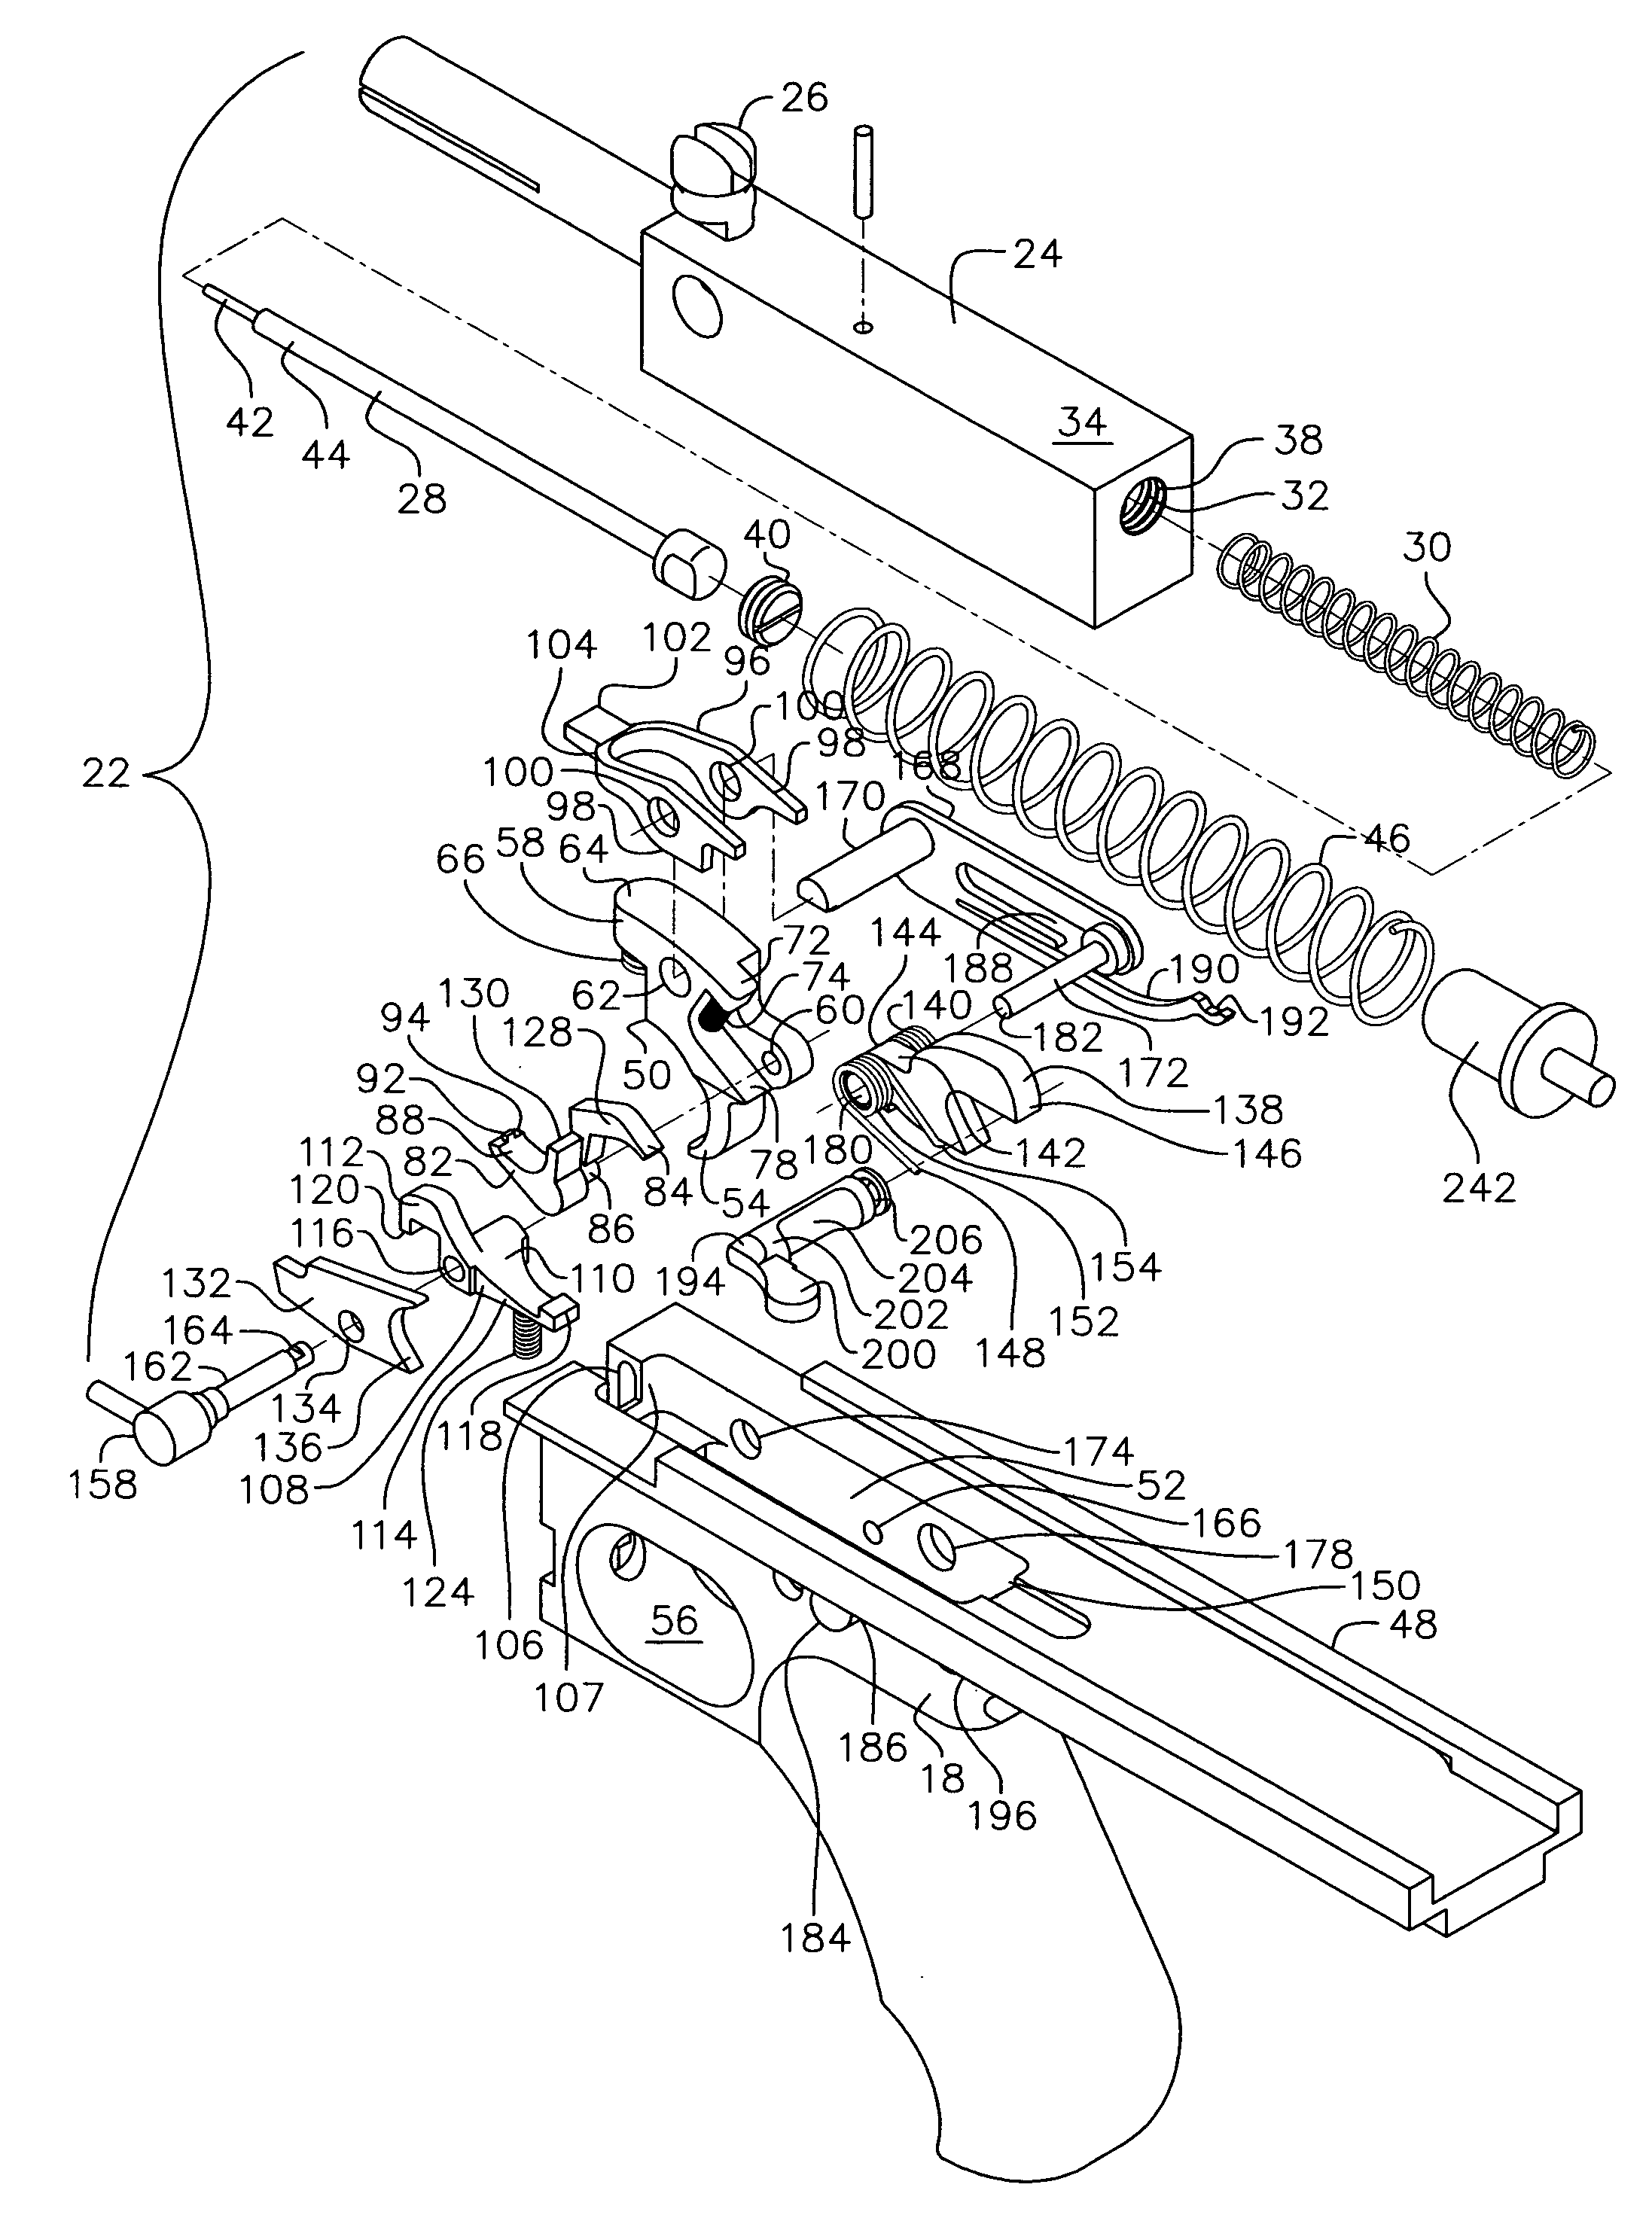 Closed bolt system with tigger assembly for converting afully automatic submachine gun into a semi-automatic carbine